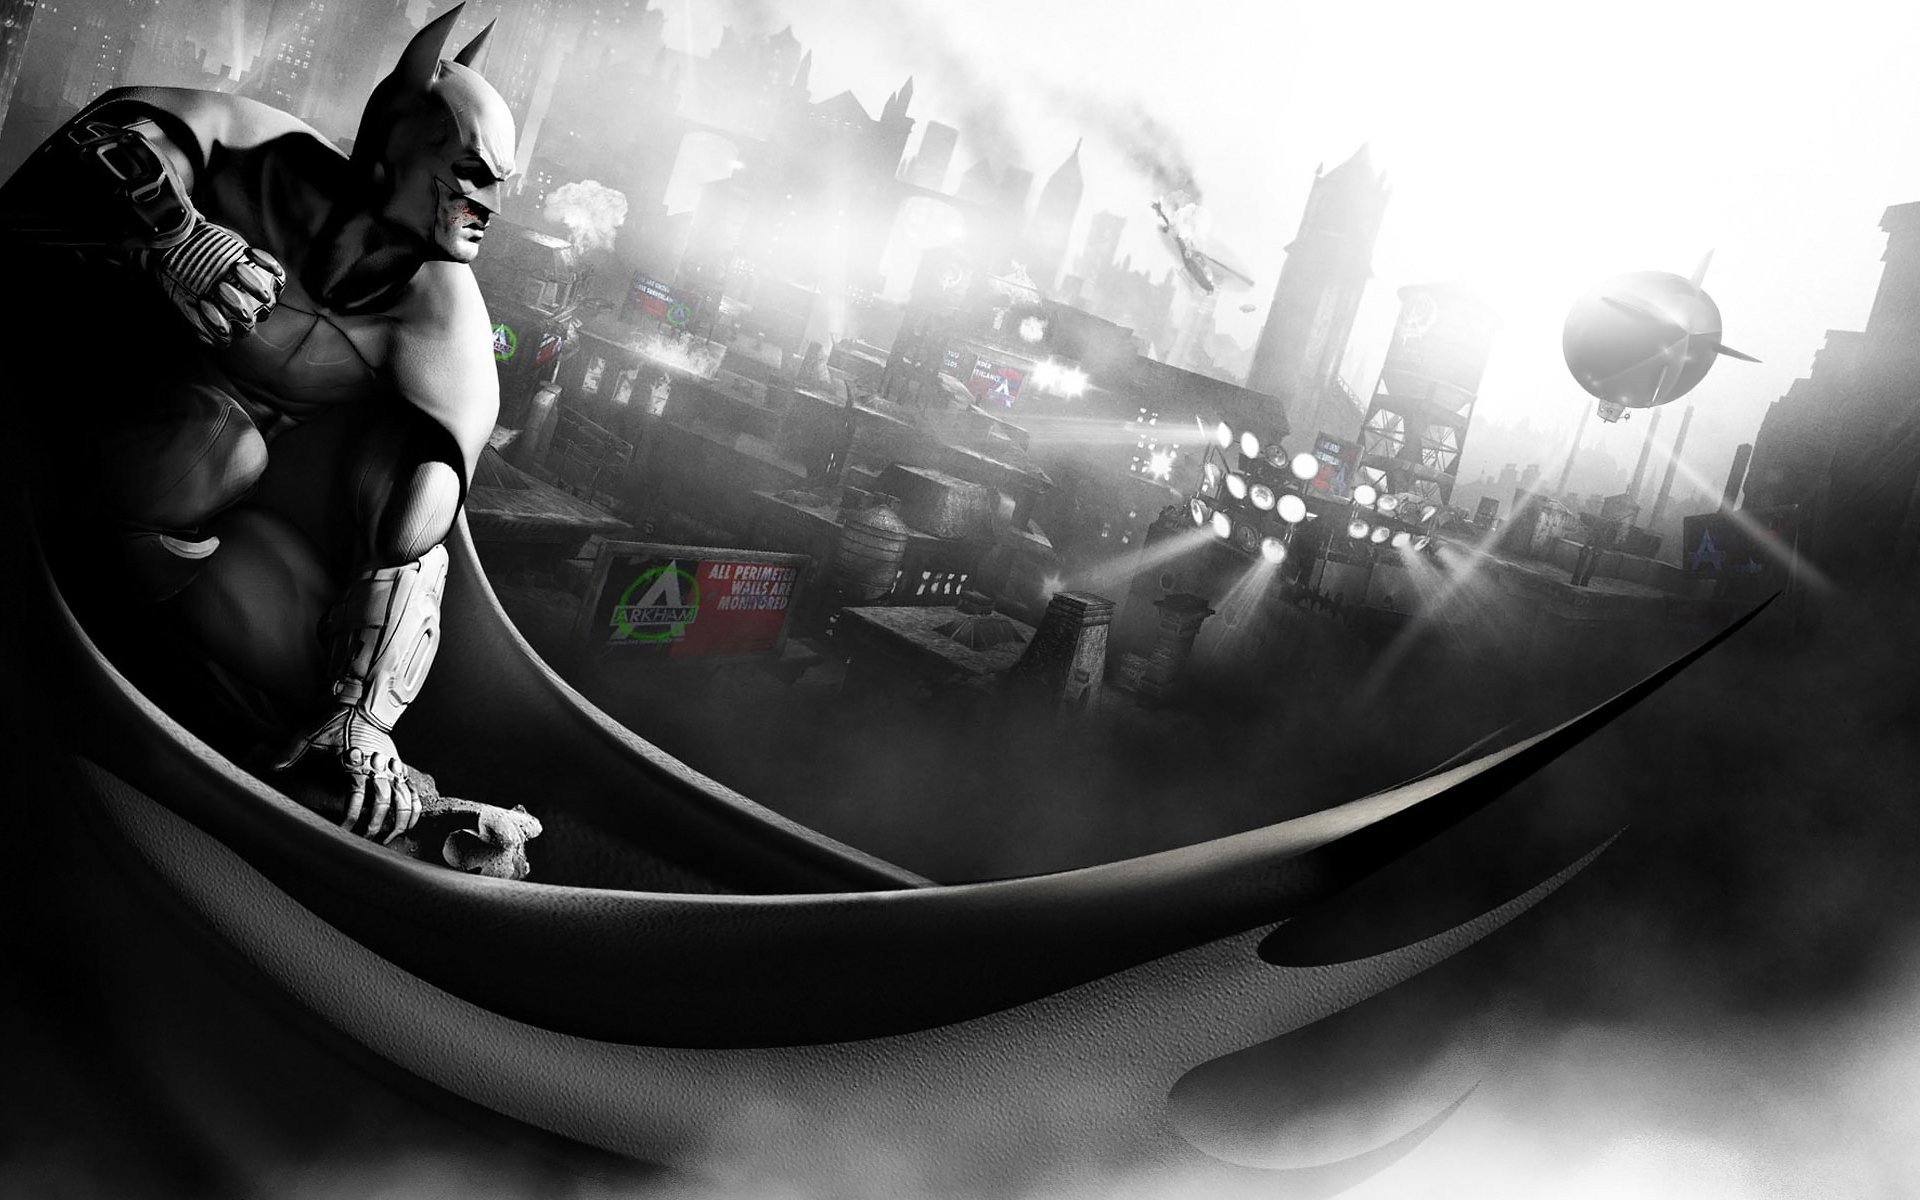 2048x1152 Batman Black And White Gotham City 2048x1152 Resolution HD 4k Wallpapers, Image, Backgrounds, Photos and Pictures